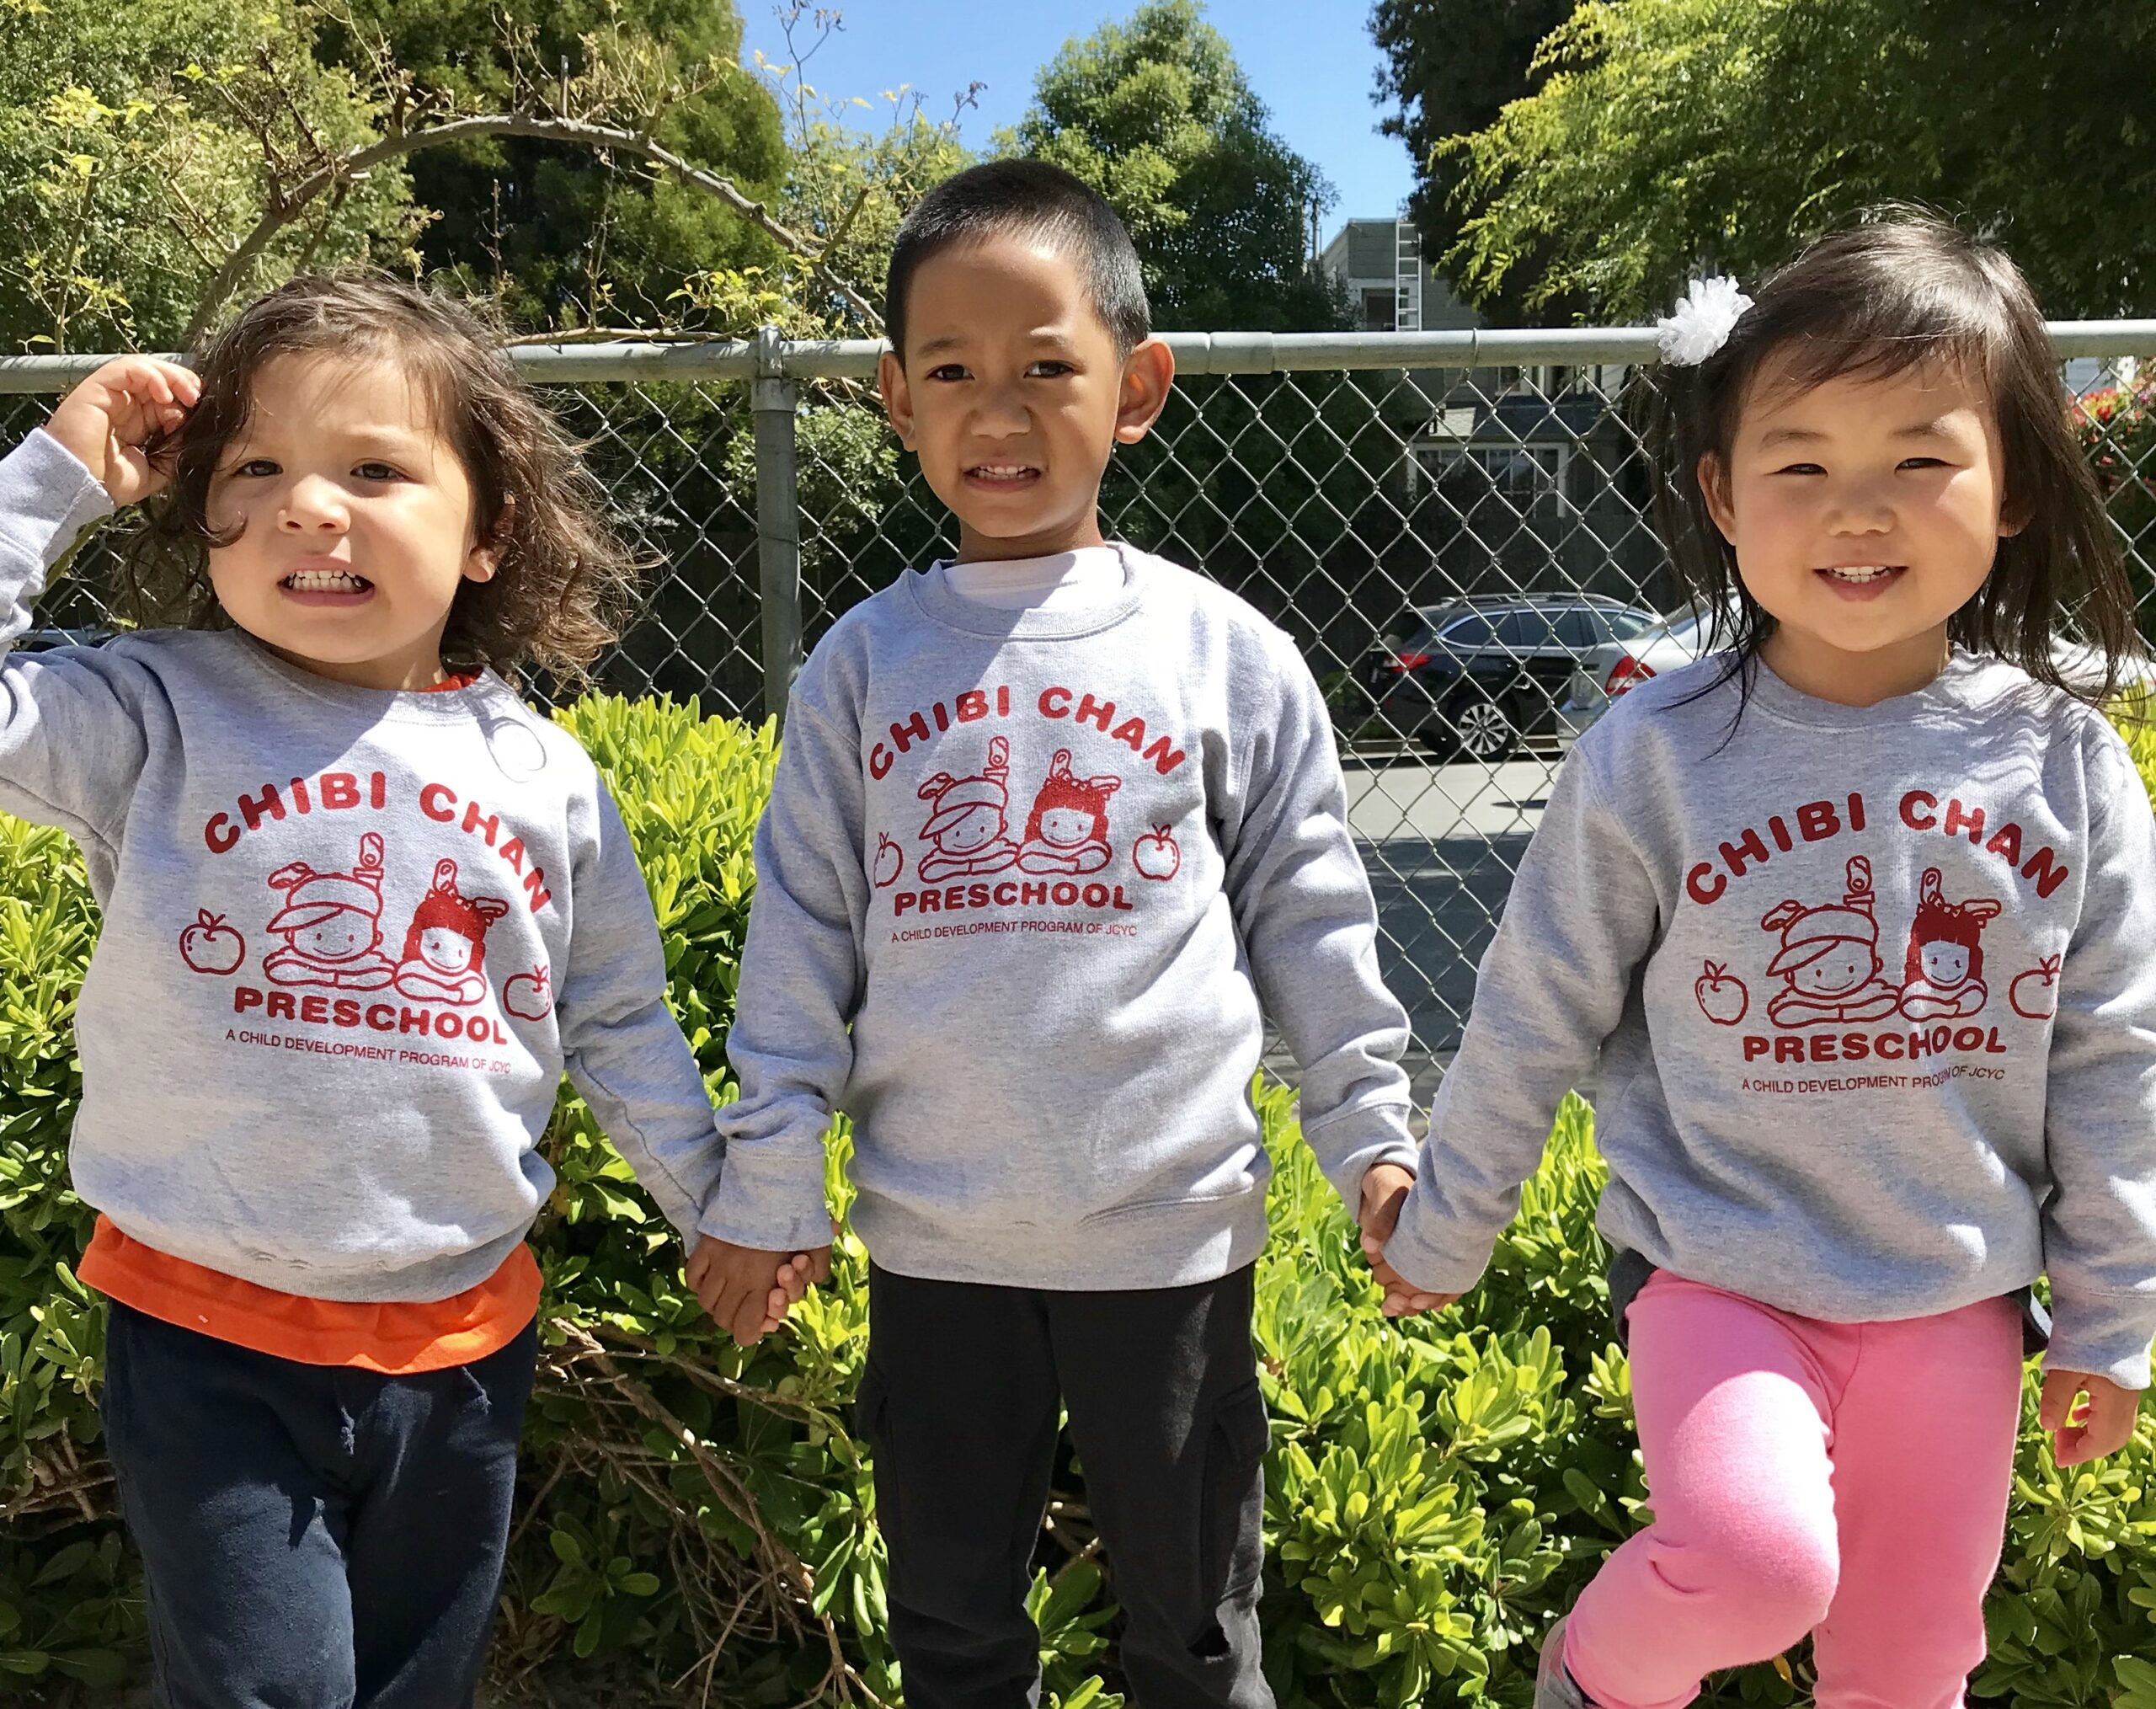 Children in Chibi Chan sweatshirts playing together in San Francisco on a sunny day